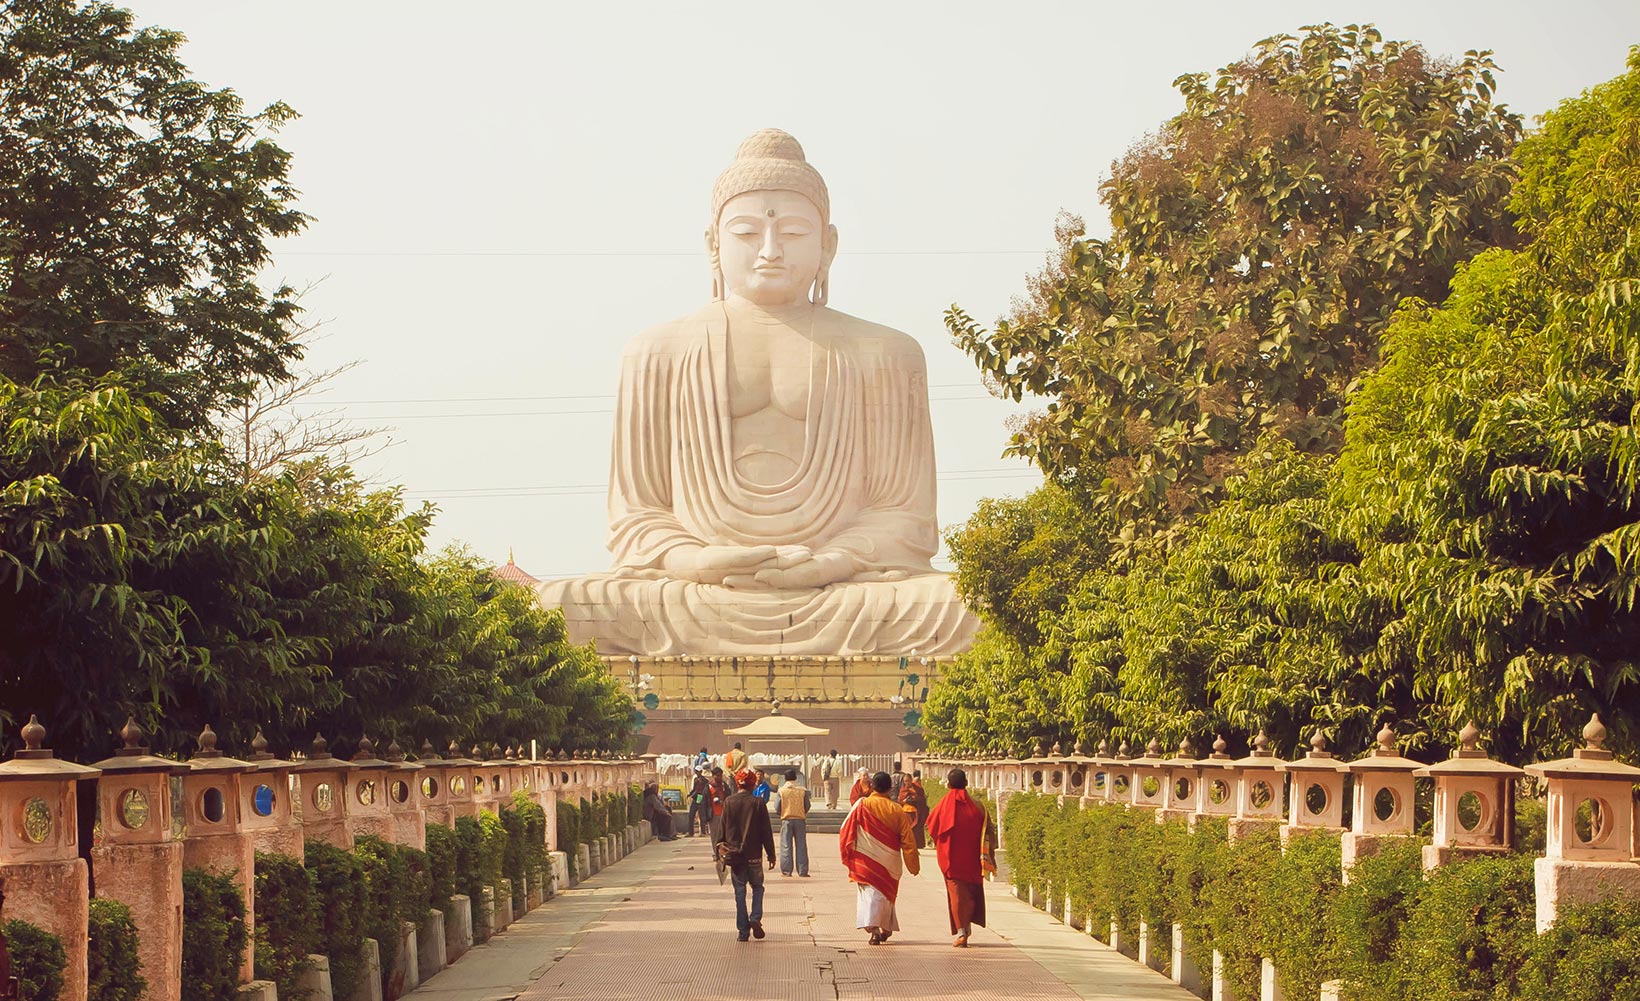 The 7 spots at the Mahabodhi Temple which can be applied to our daily lives